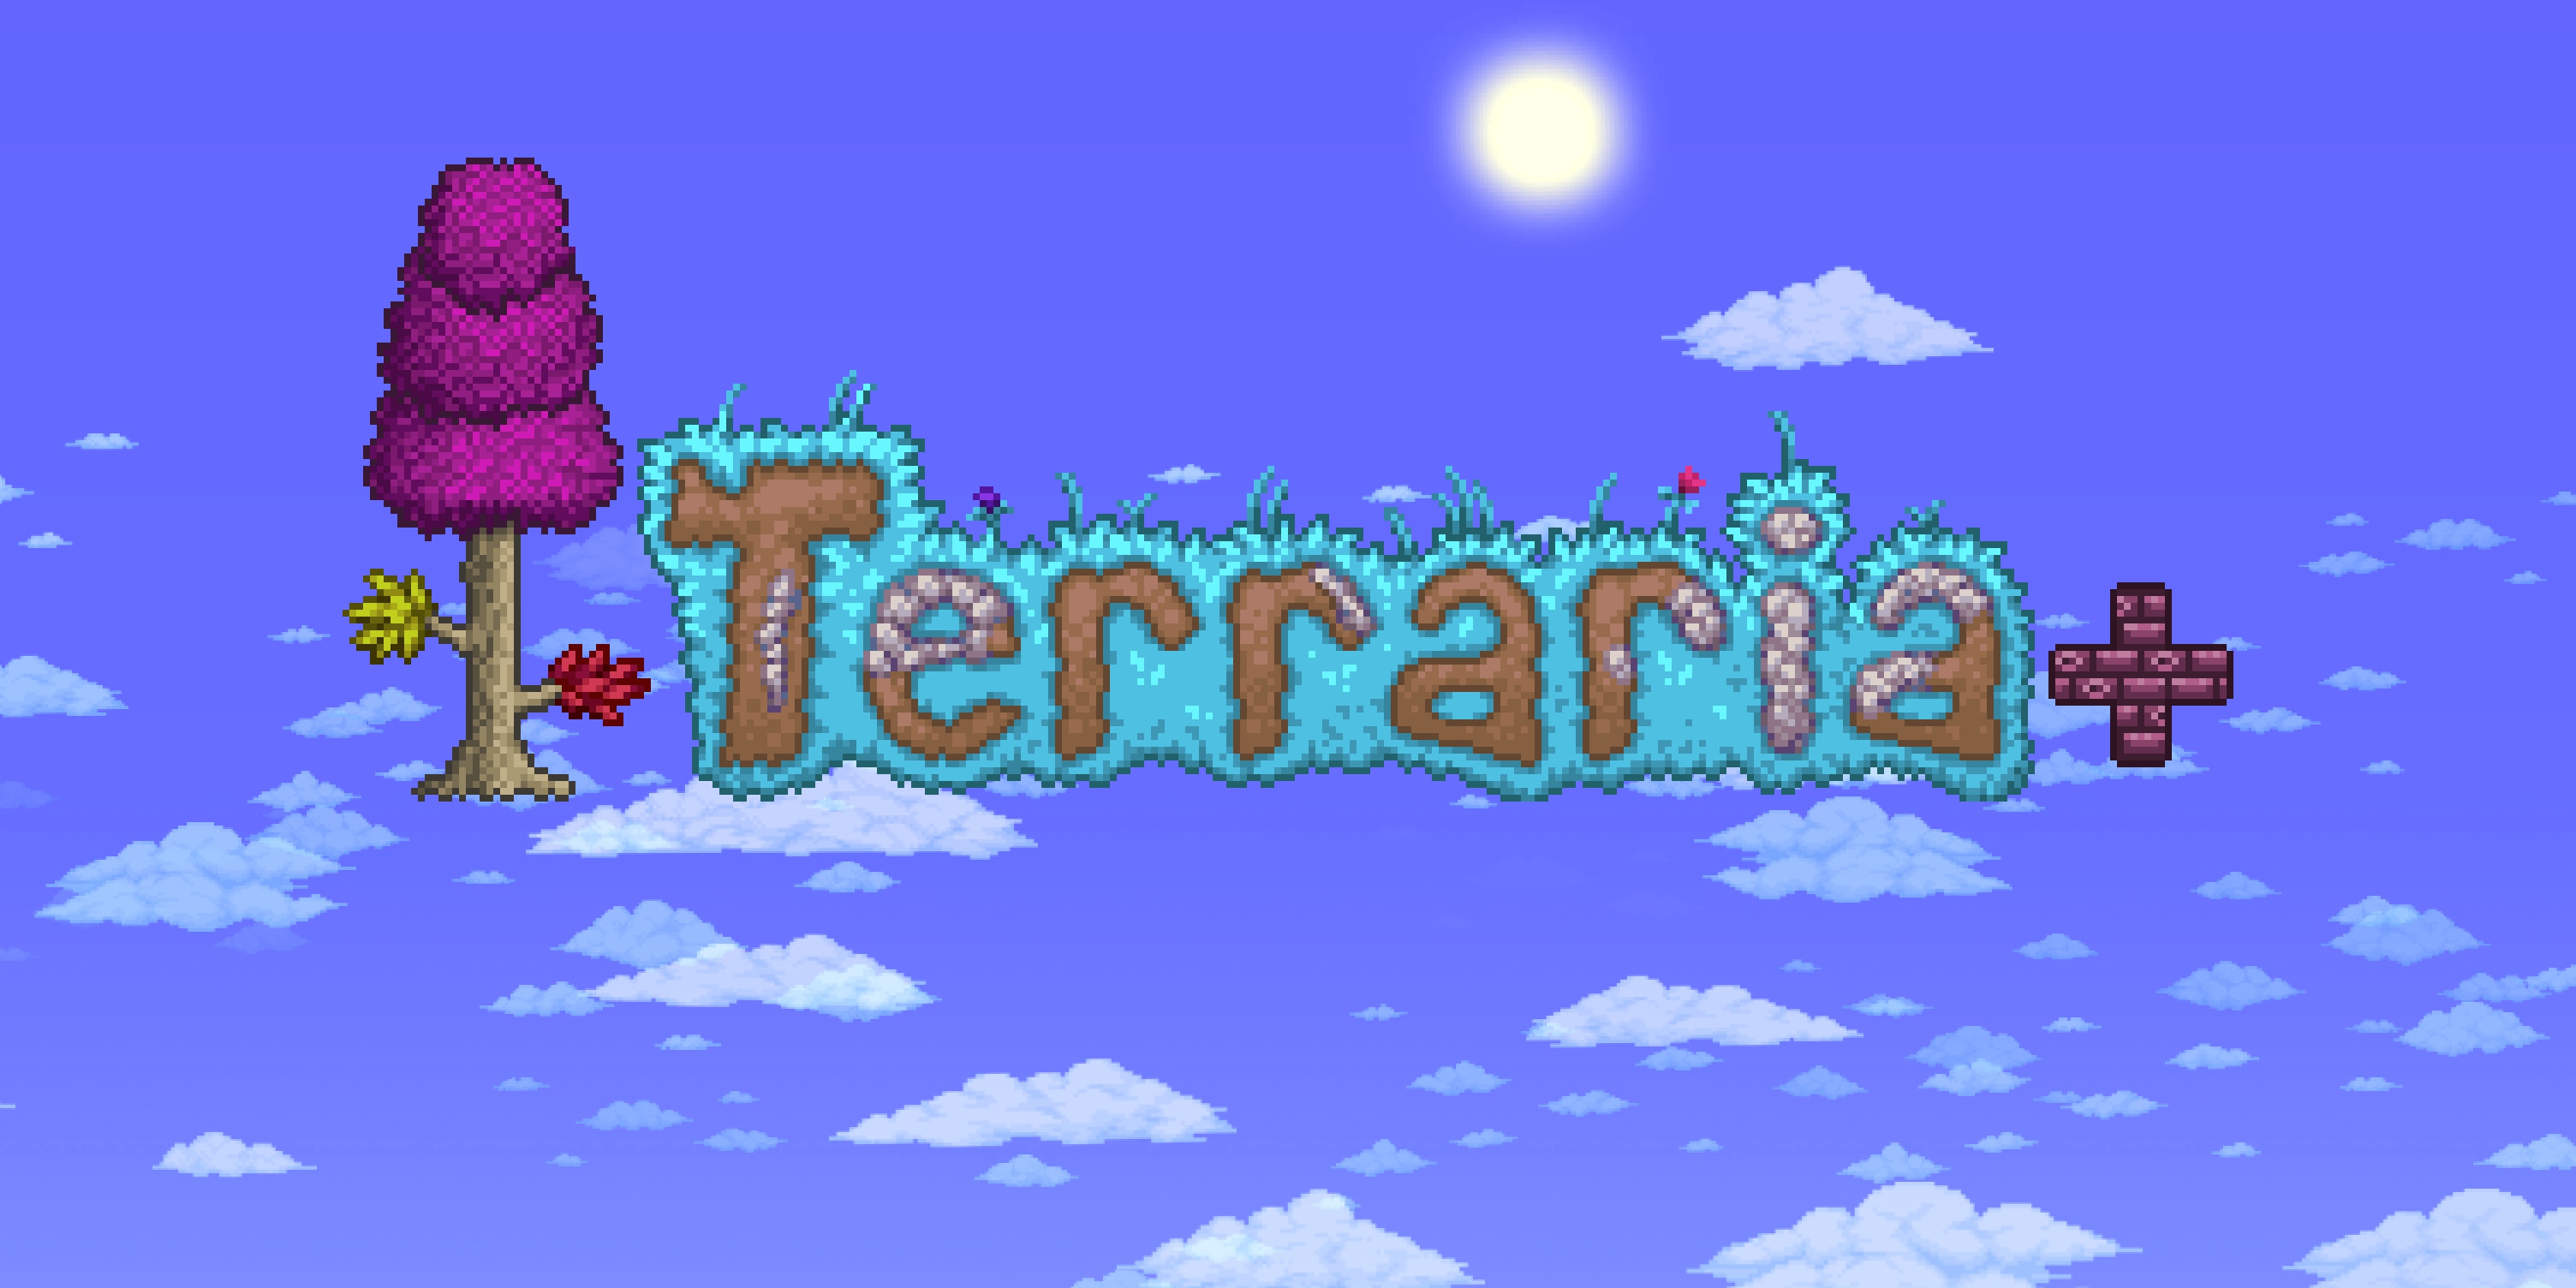 Reforged this and immediately got Menacing : r/Terraria